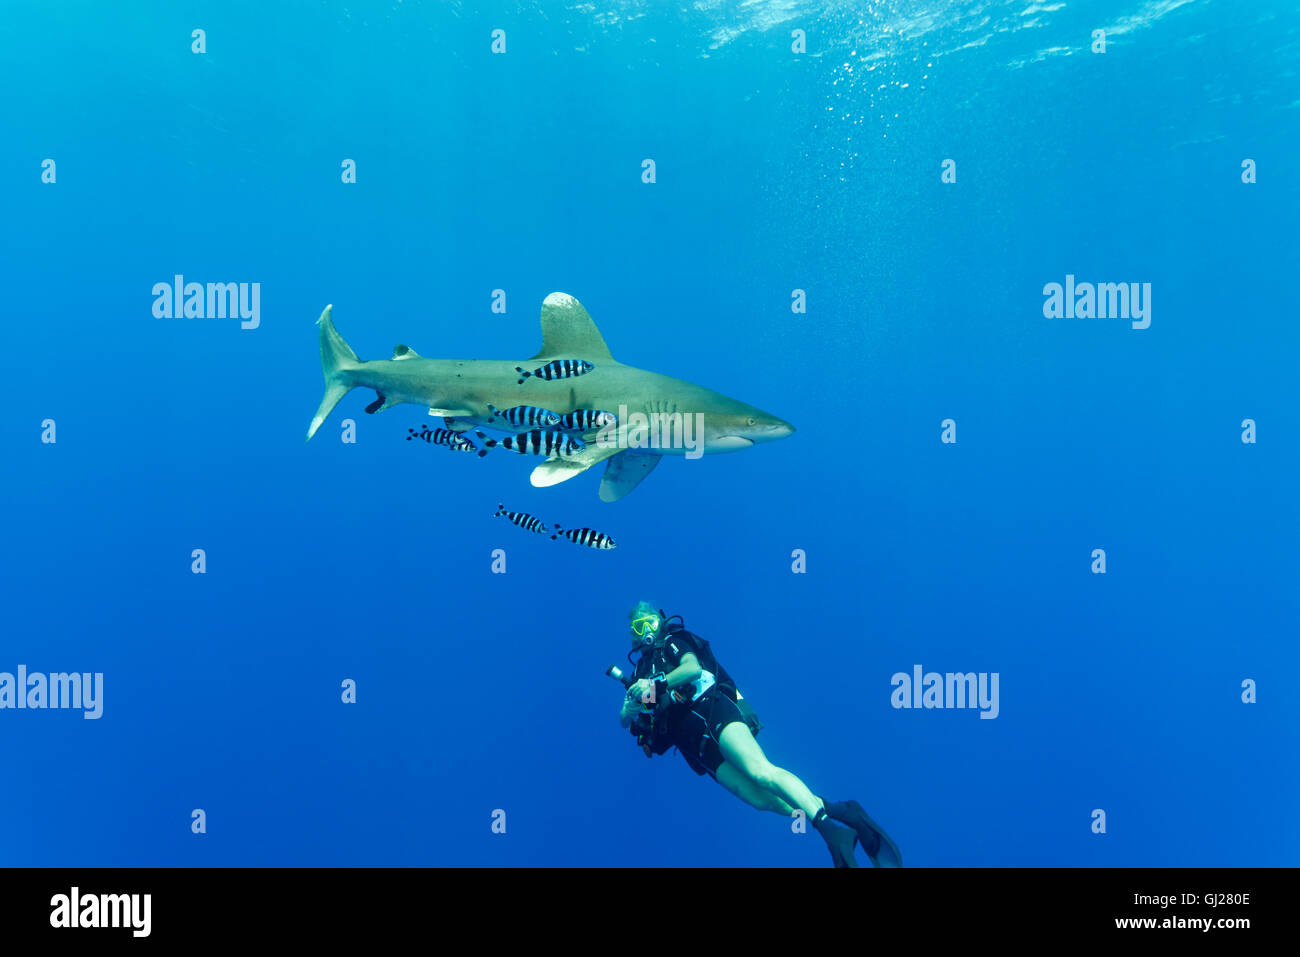 Oceanic whitetip shark with pilotfish and scuba diver, Daedalus Reef, Red Sea, Egypt Stock Photo